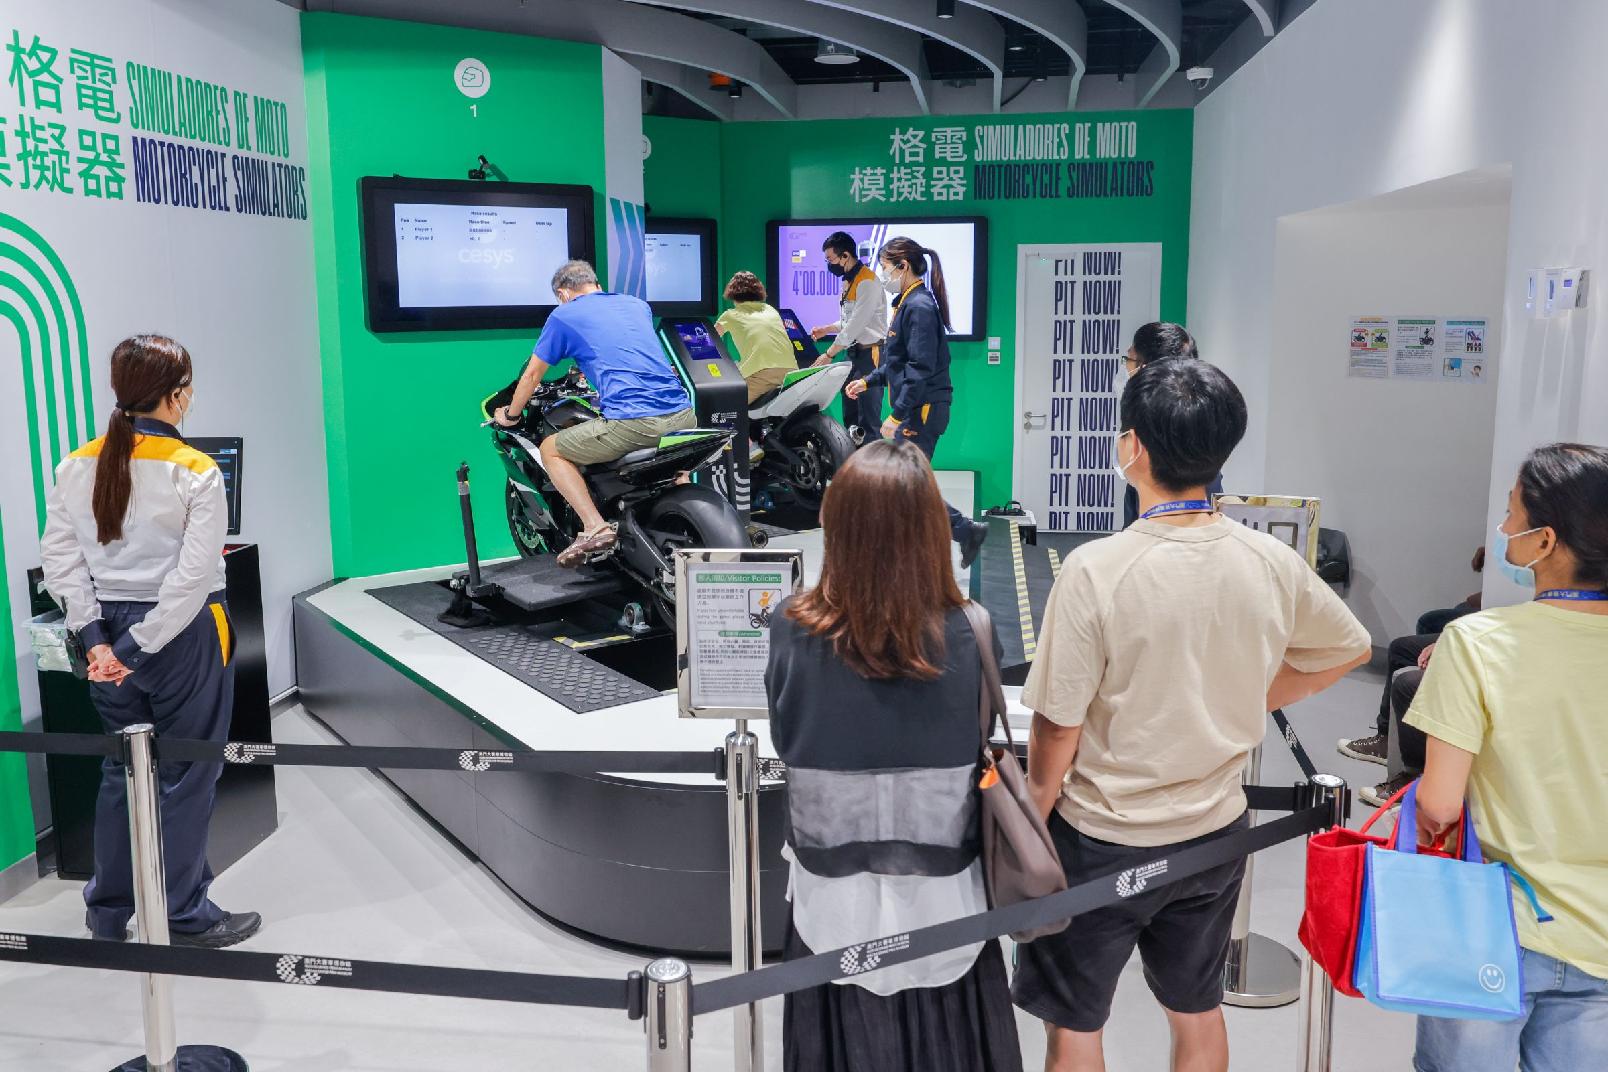 Experience the brand-new Motorcycle Racing Simulator